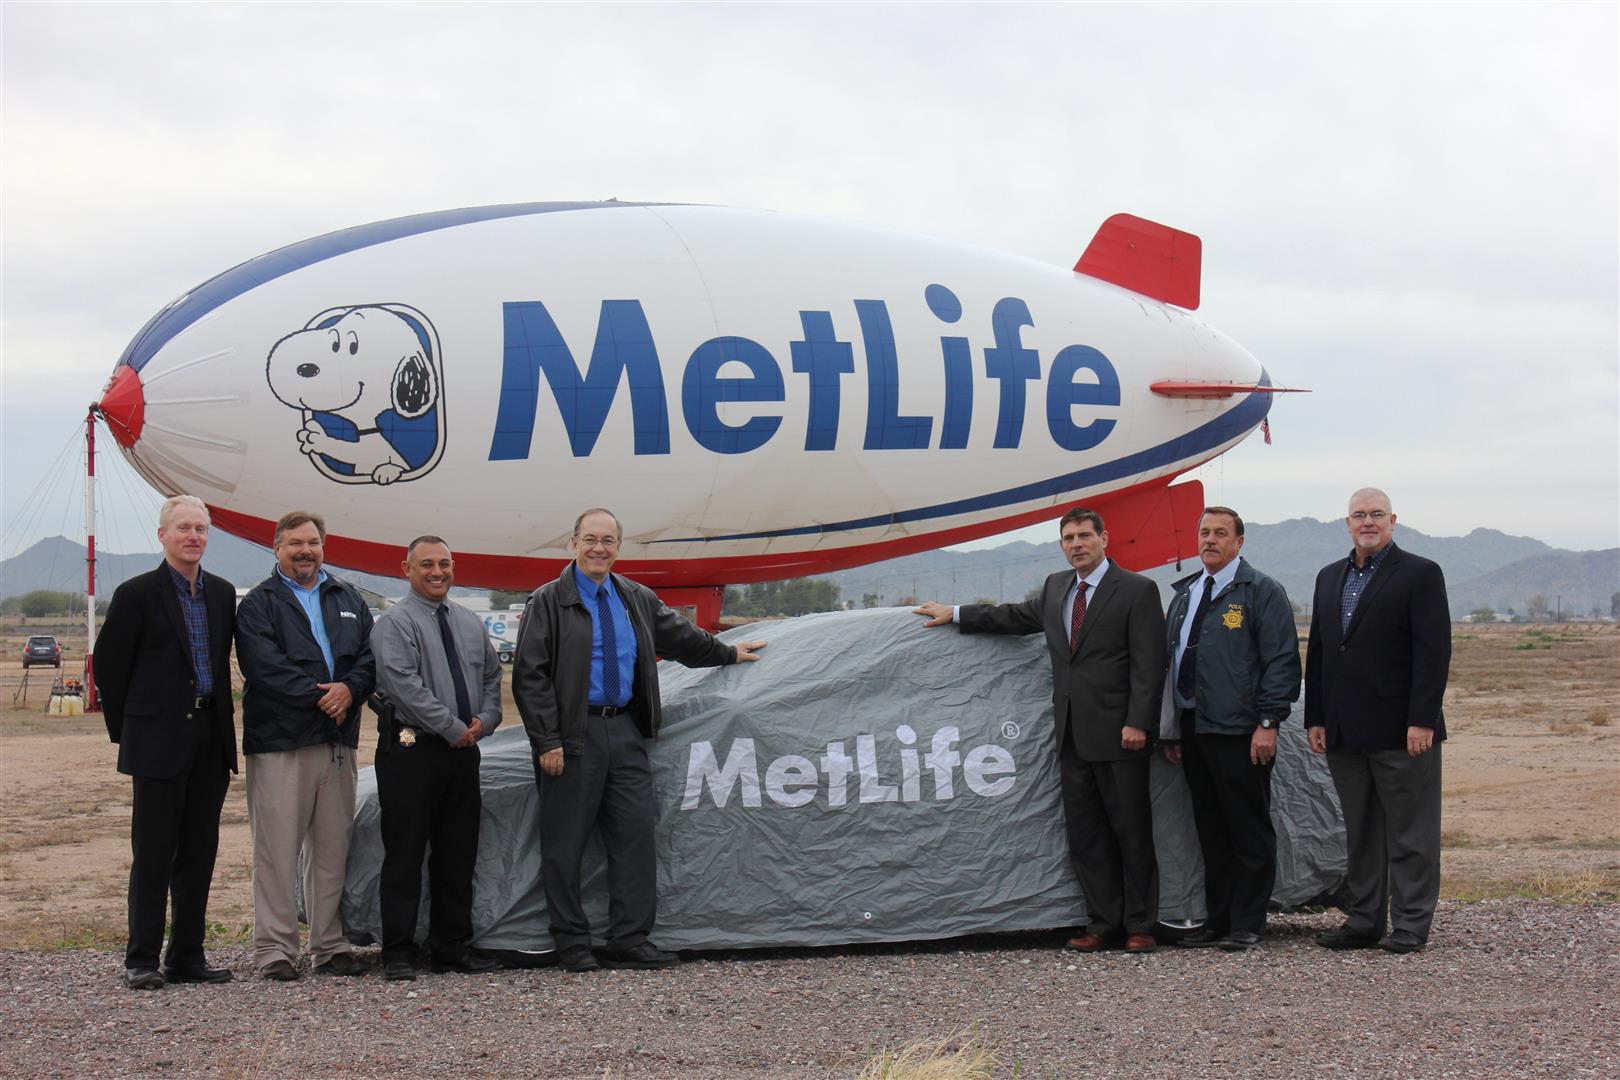 Men smiling in front of a covered vehicle with a MetLife blimp behind them